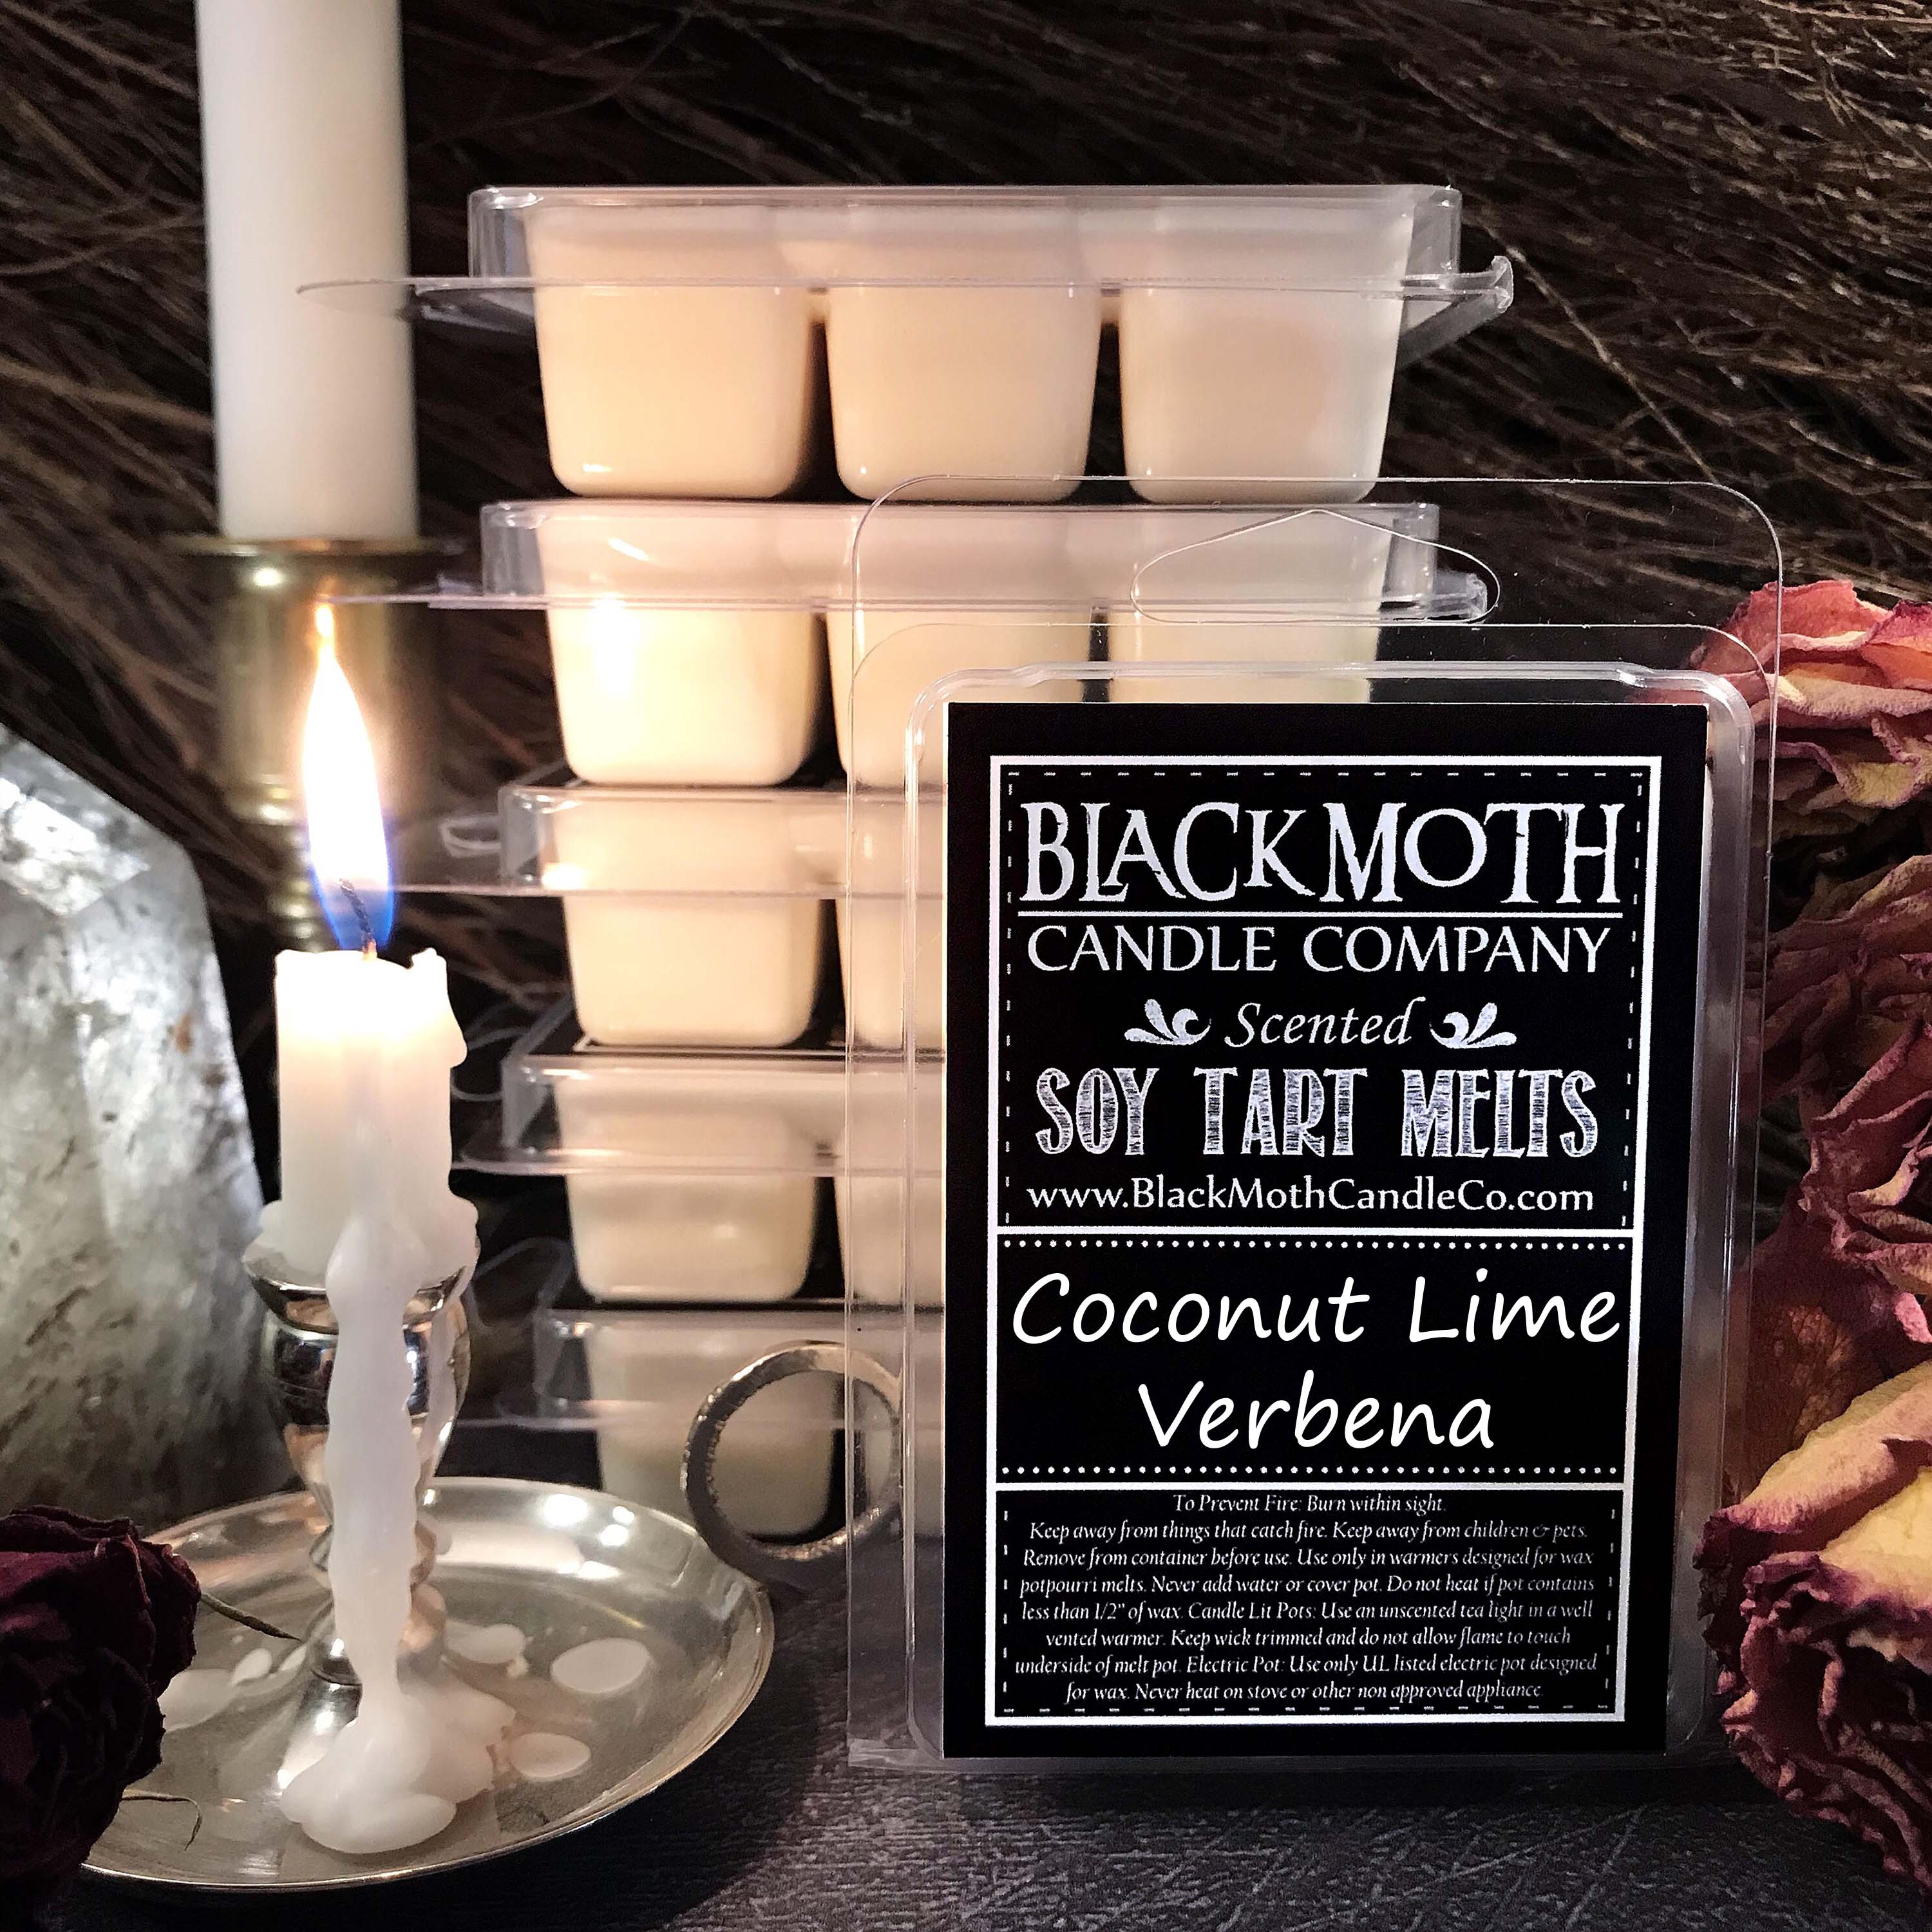 Coconut Lime Verbena Scented Soy Wax Melts